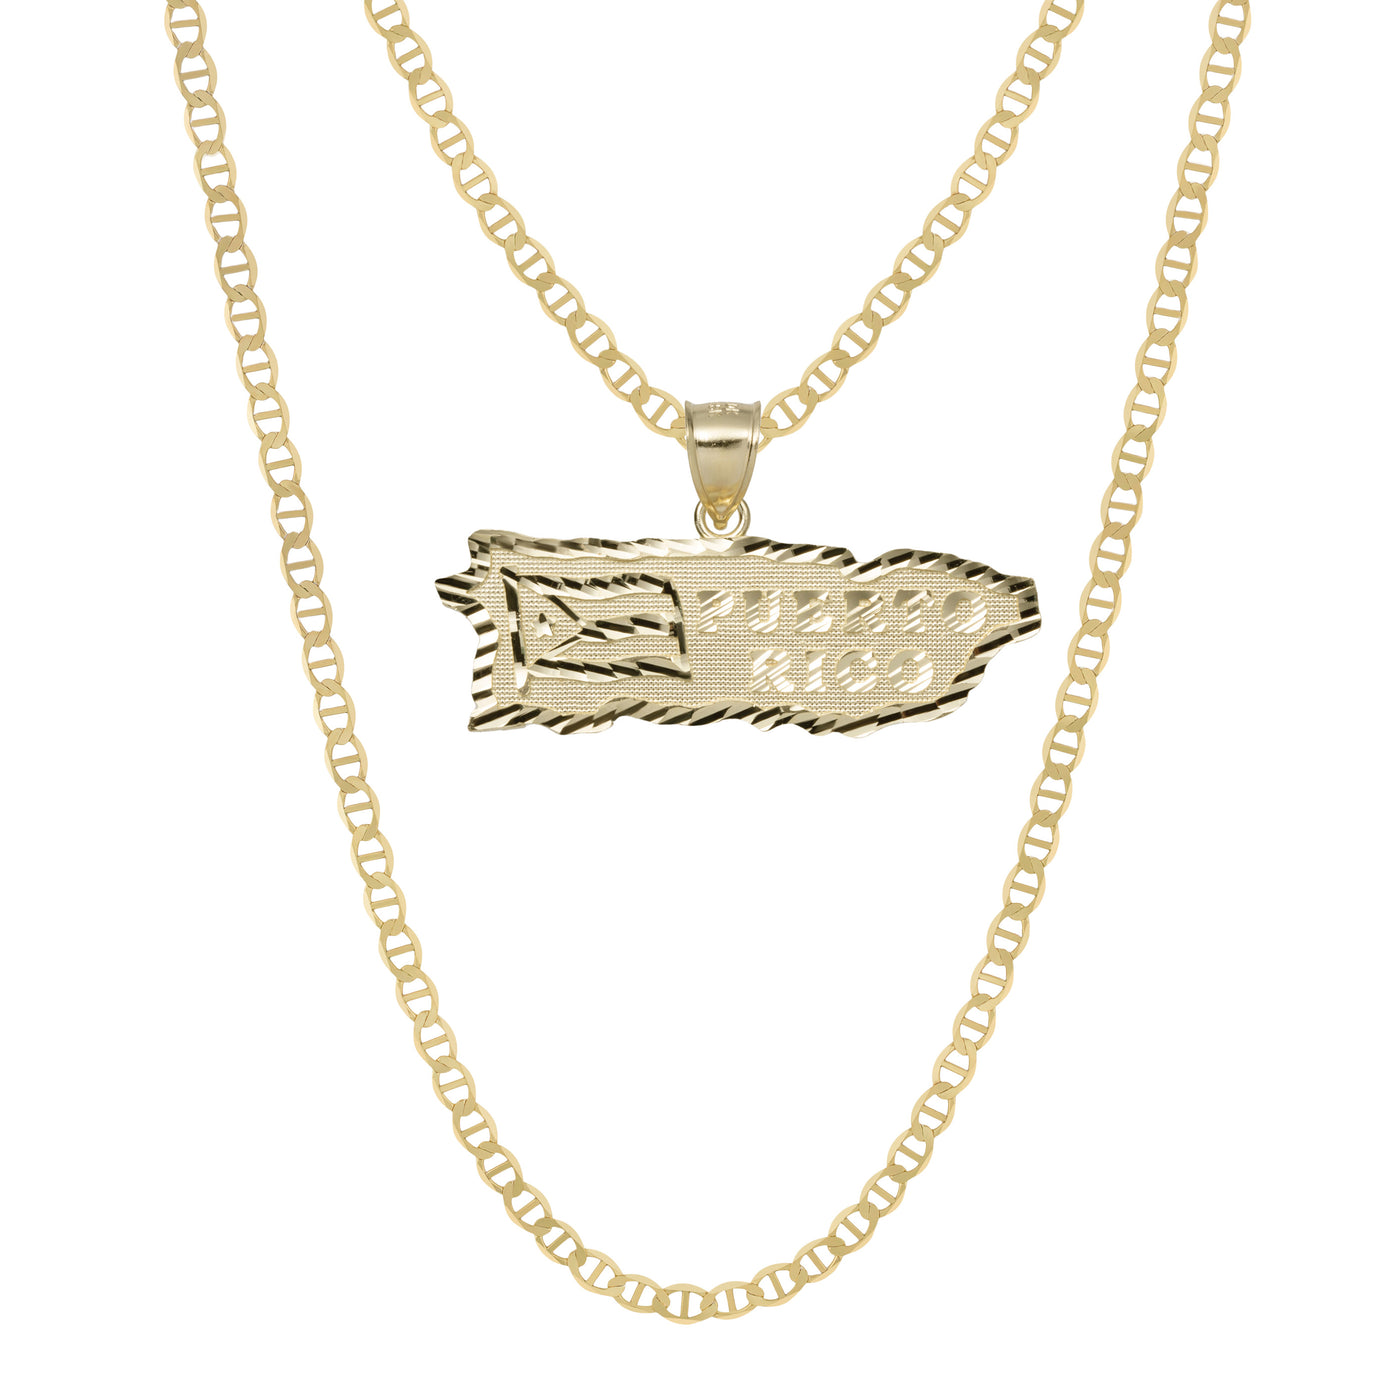 1 1/4" Puerto Rico Map & Flag Pendant & Chain Necklace Set 10K Yellow Gold